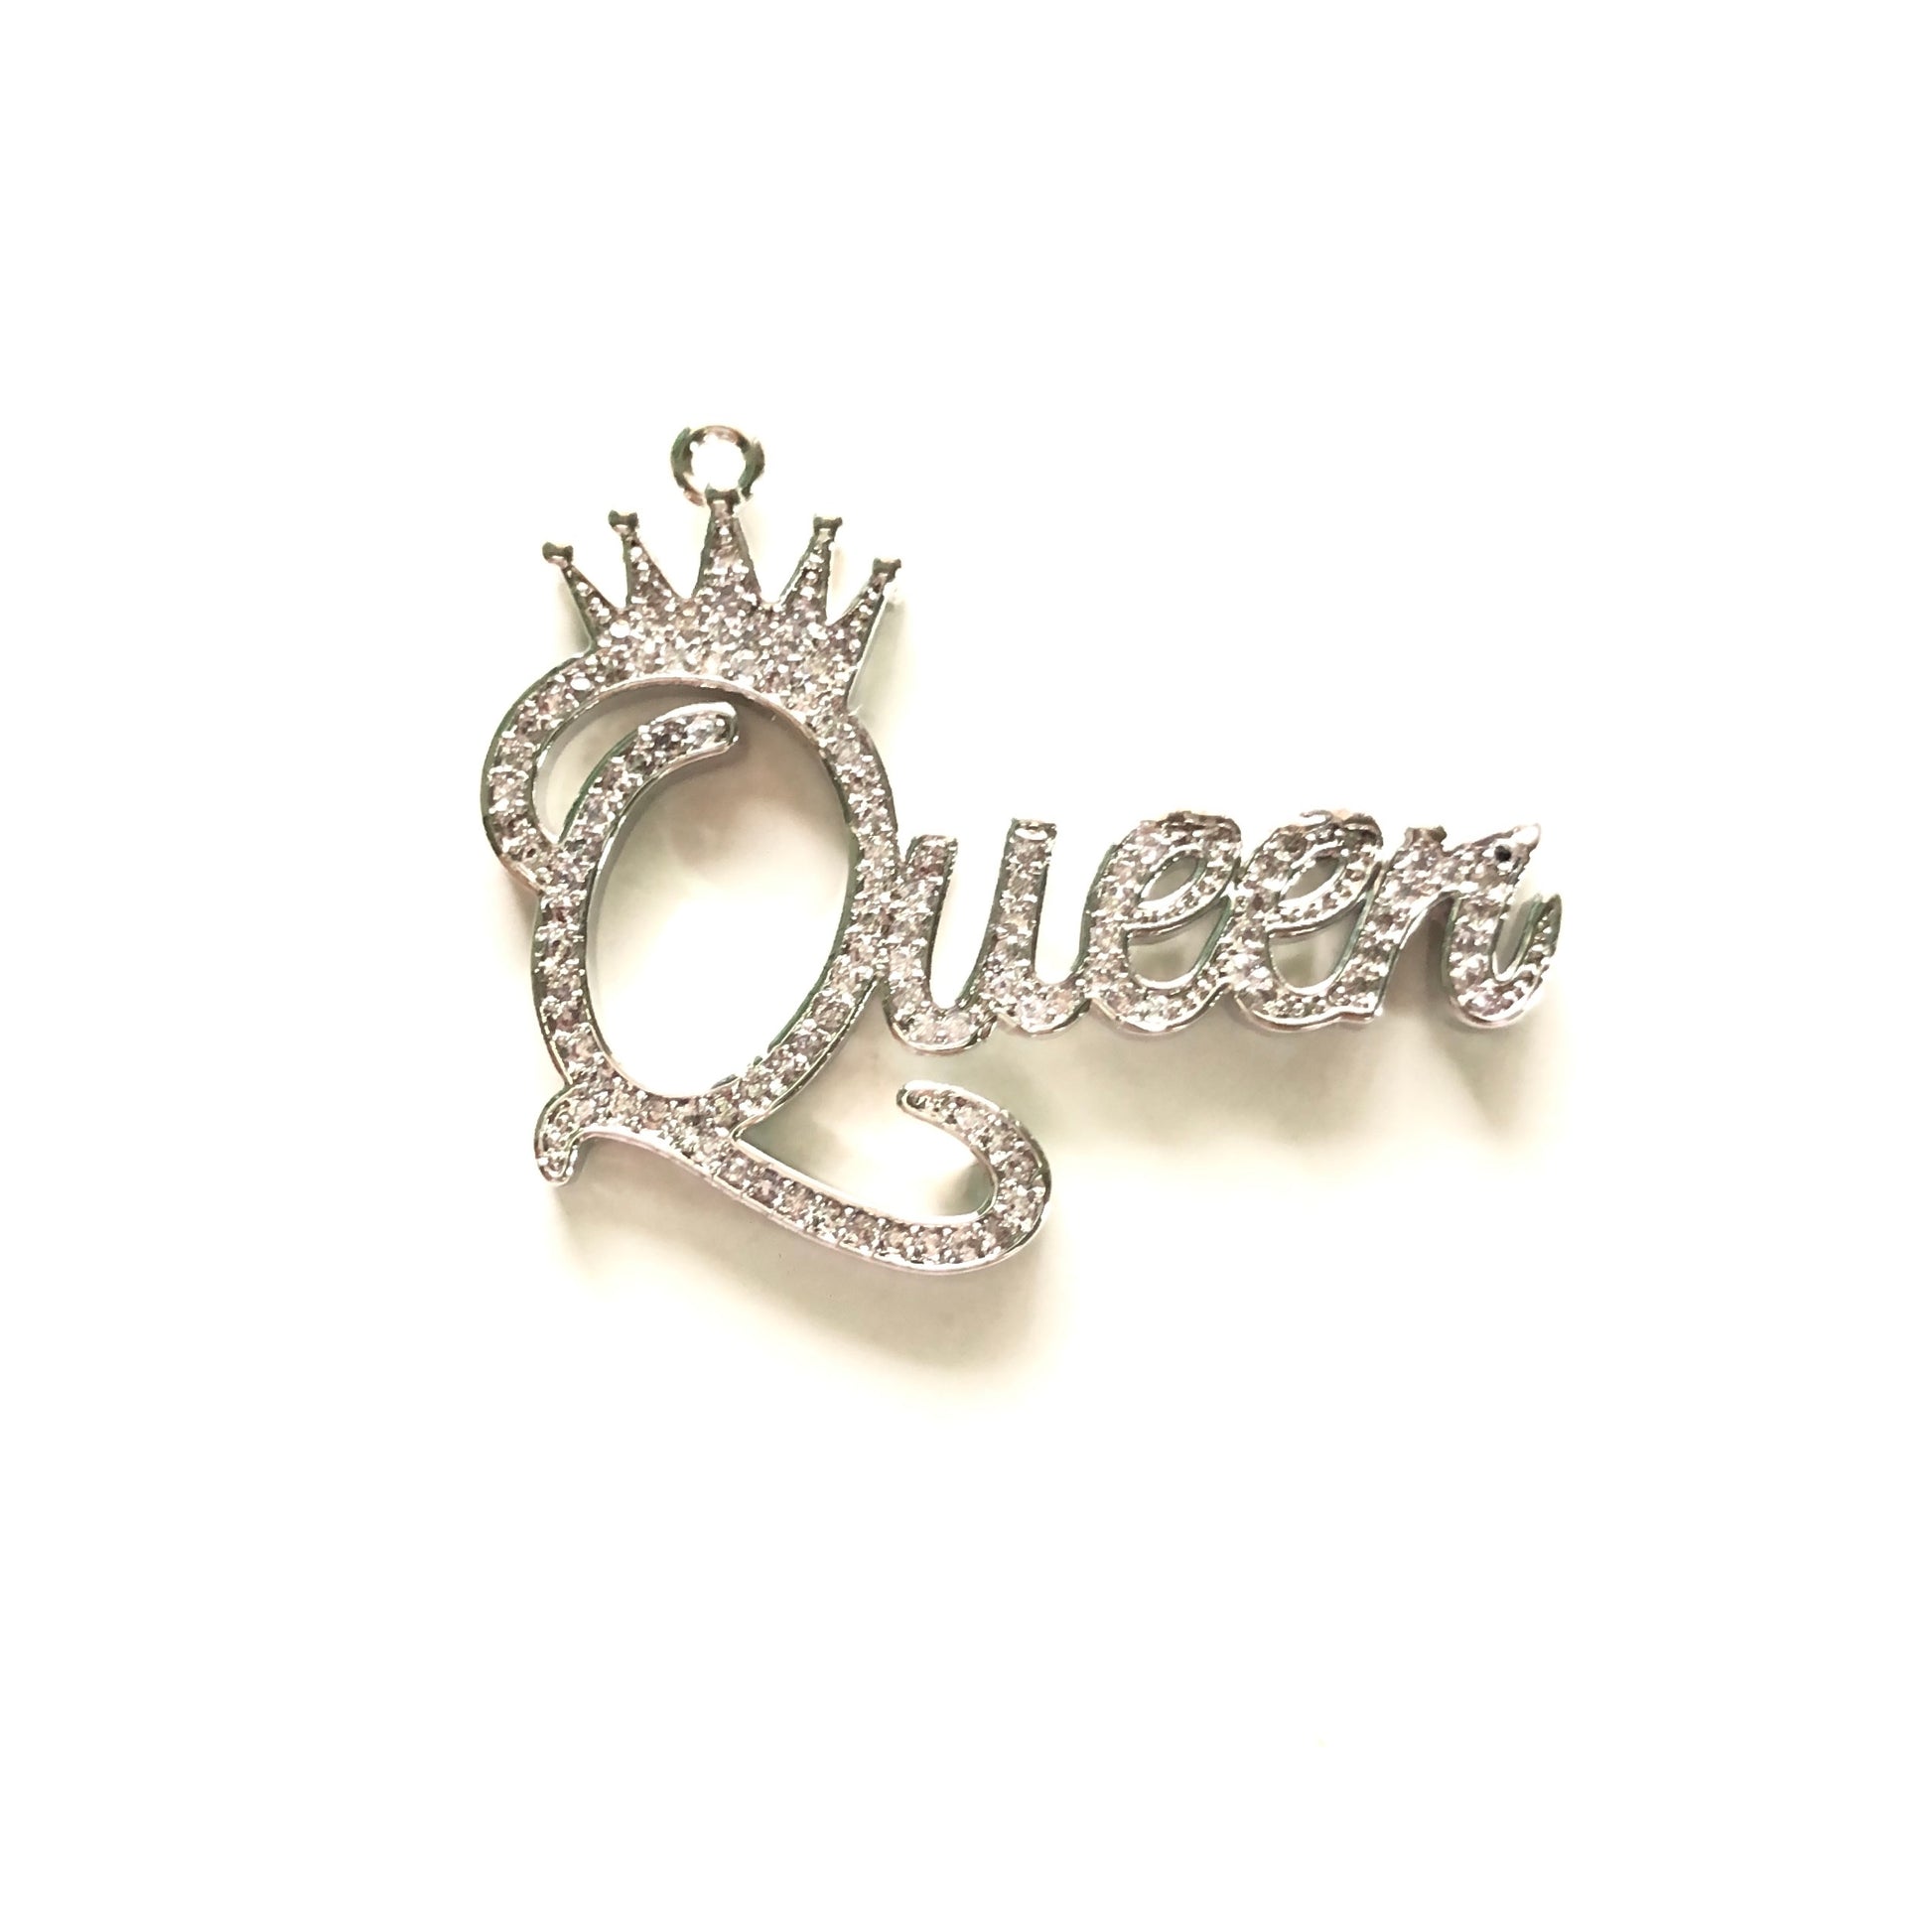 10pcs/lot 39*30mm CZ Paved Crown Queen Word Charms Silver CZ Paved Charms Crowns Queen Charms Words & Quotes Charms Beads Beyond